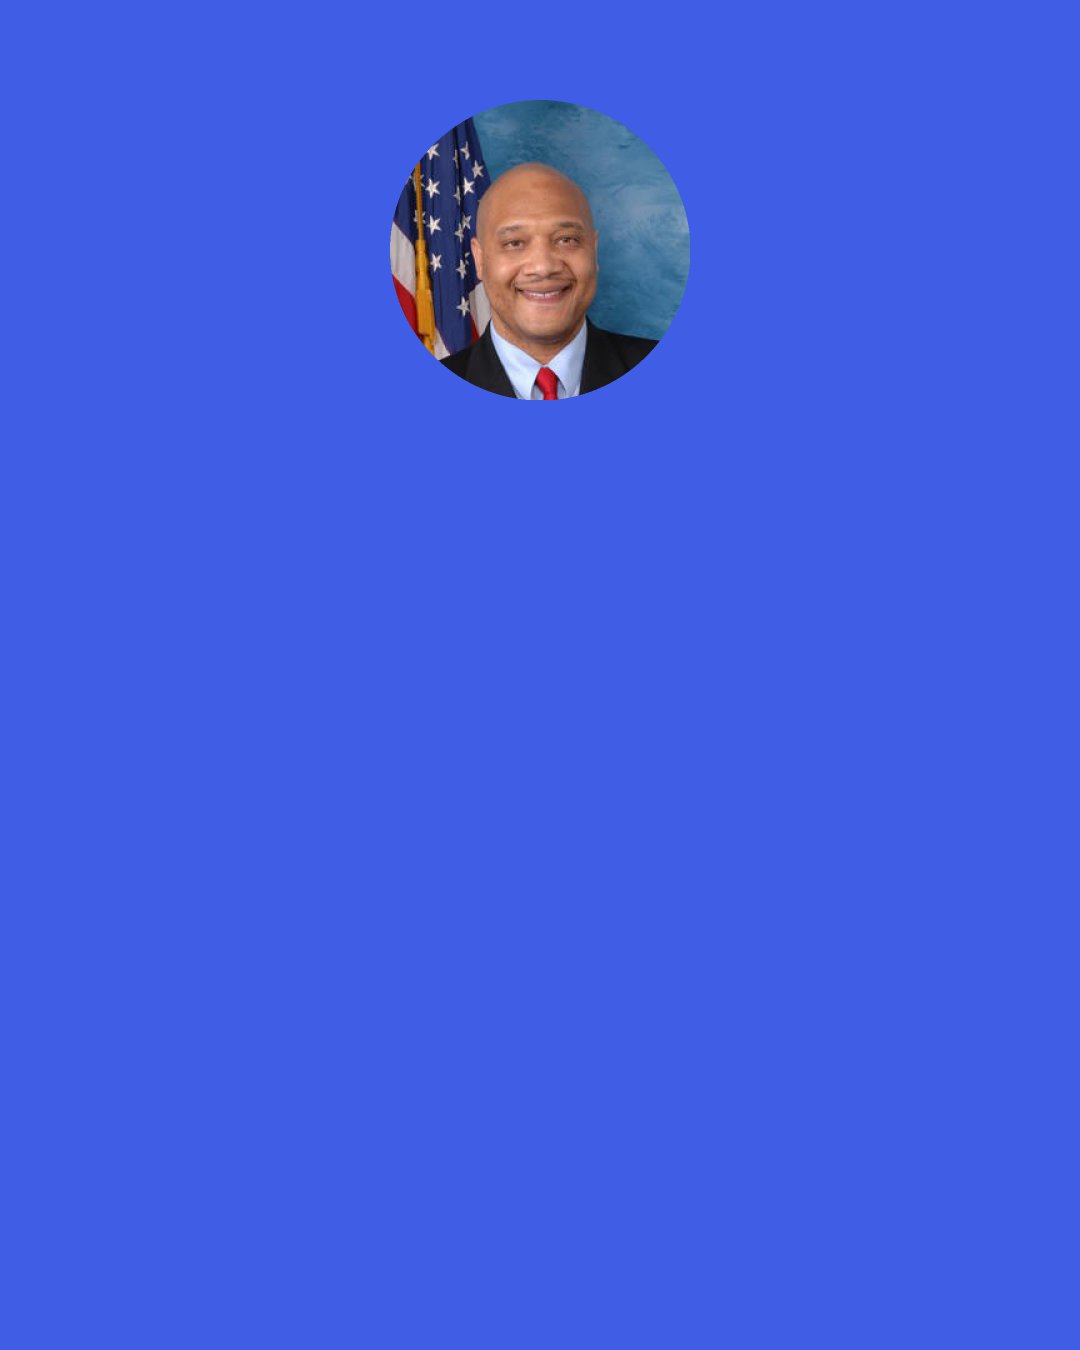 Andre Carson: Most of us are visual learners. Some of us are auditor learners – we learn by hearing. Many of us are kinesthetic learners. We learn by doing, touching, feeling. I have found … that we need an educational model that is current, that meets the need of our students. America must understand that she needs Muslims.